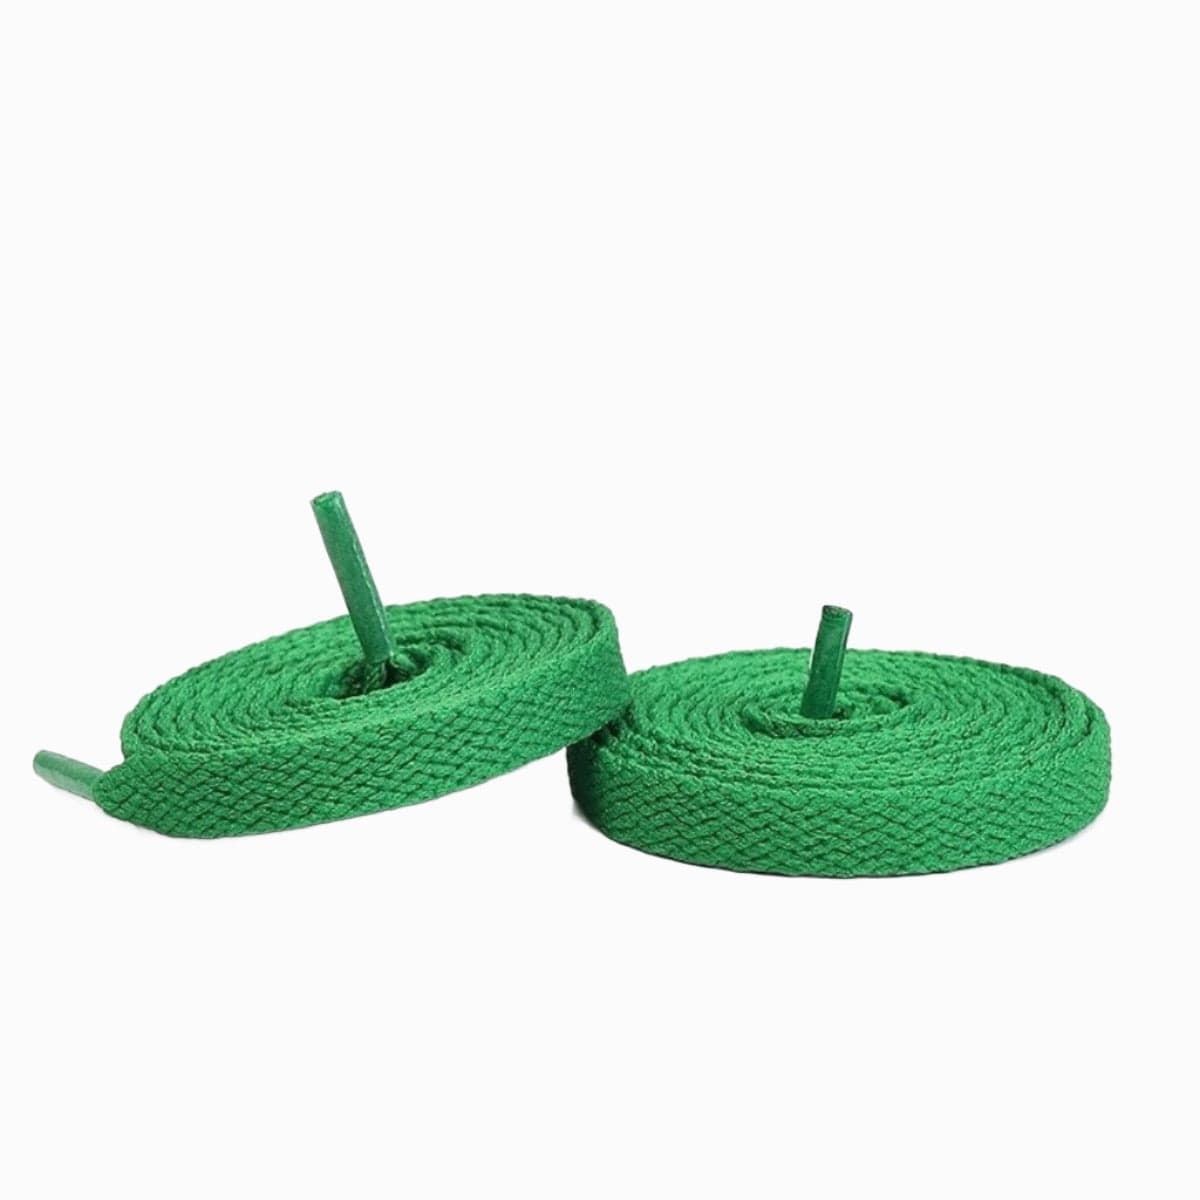 Green Replacement Adidas Shoe Laces for Adidas Handball Spezial Sneakers by Kicks Shoelaces